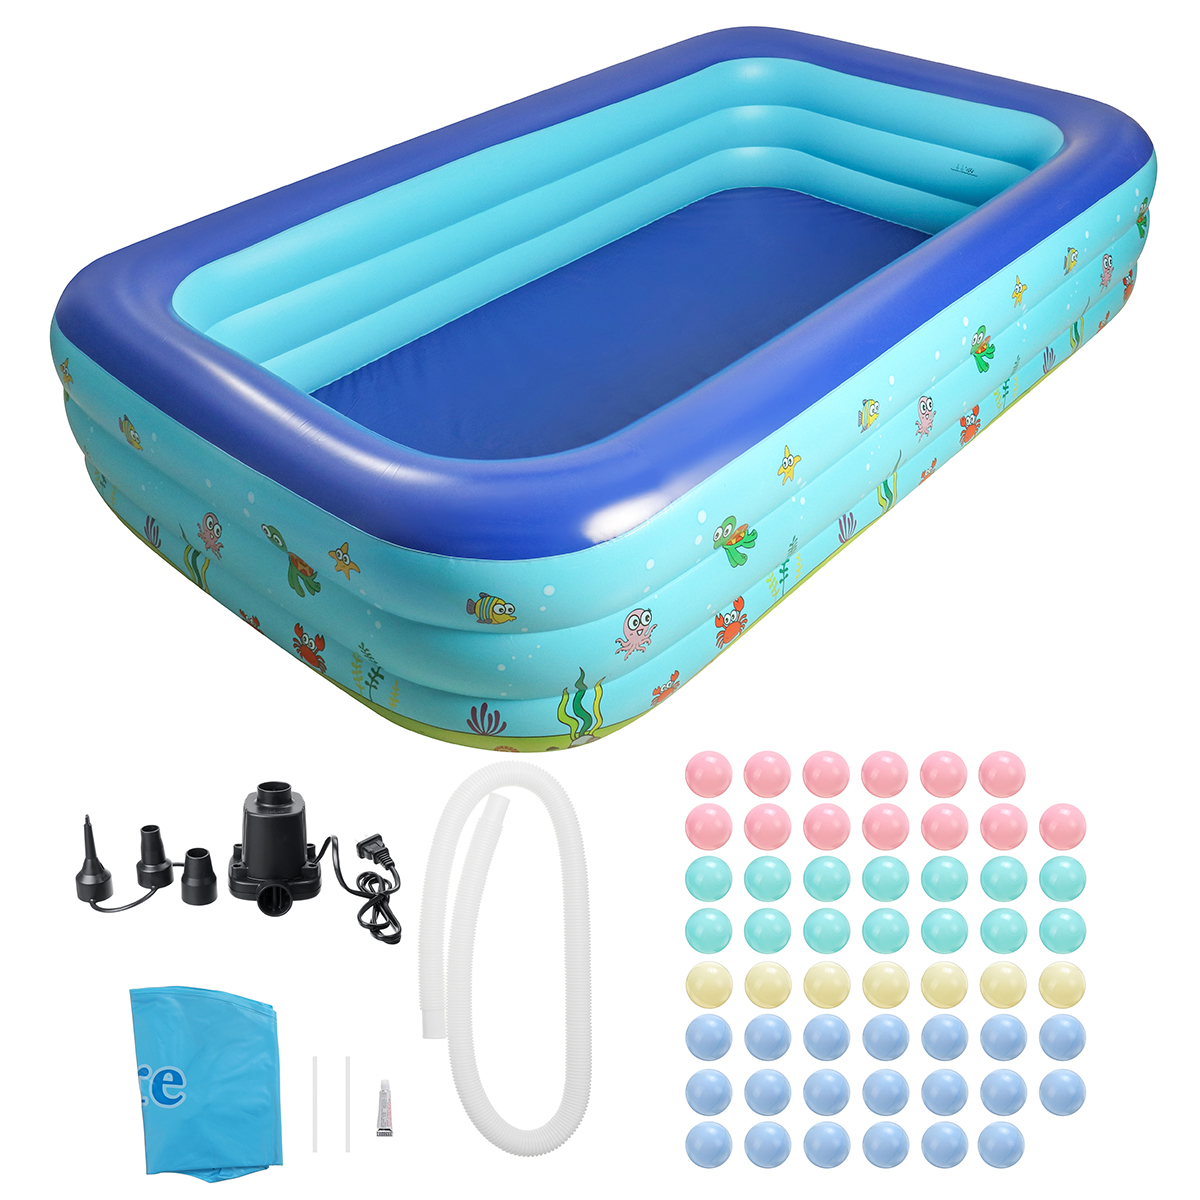 120x72x24inch-Family-Inflatable-Swimming-Pool-Outdoor-Garden-Ground-Swimming-Pool-with-Filter-Pump-1697937-6